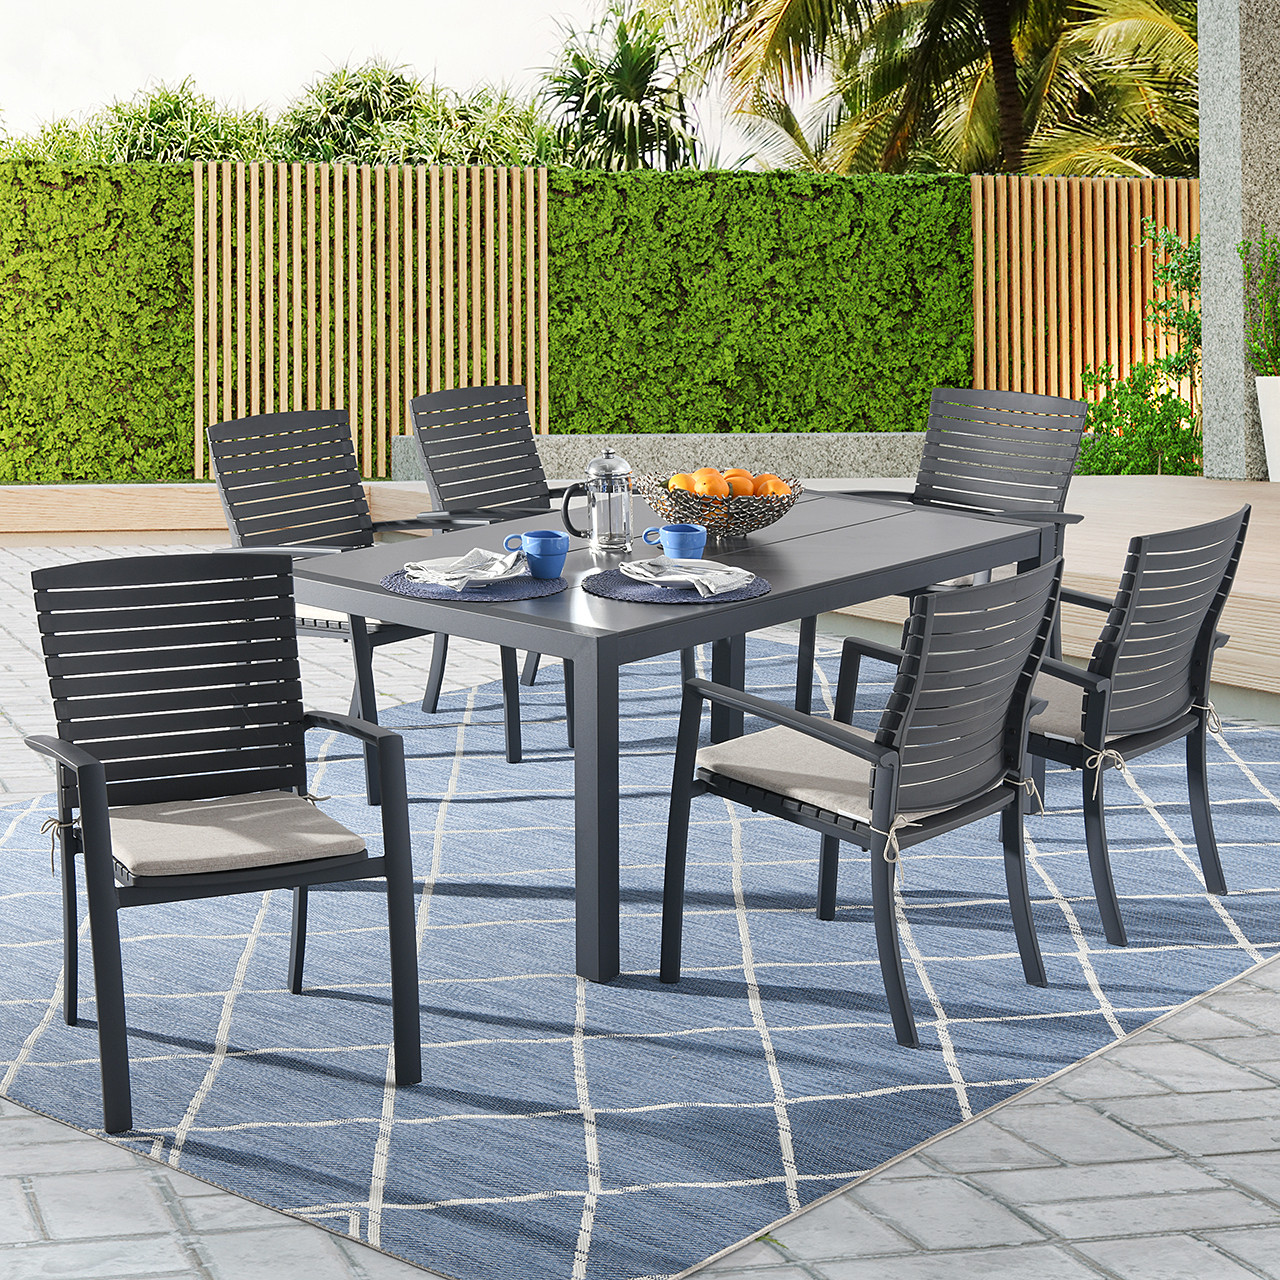 Miami Dark Grey Aluminum and Cushion 7 Piece Dining Set with 63 x 36 in. Table